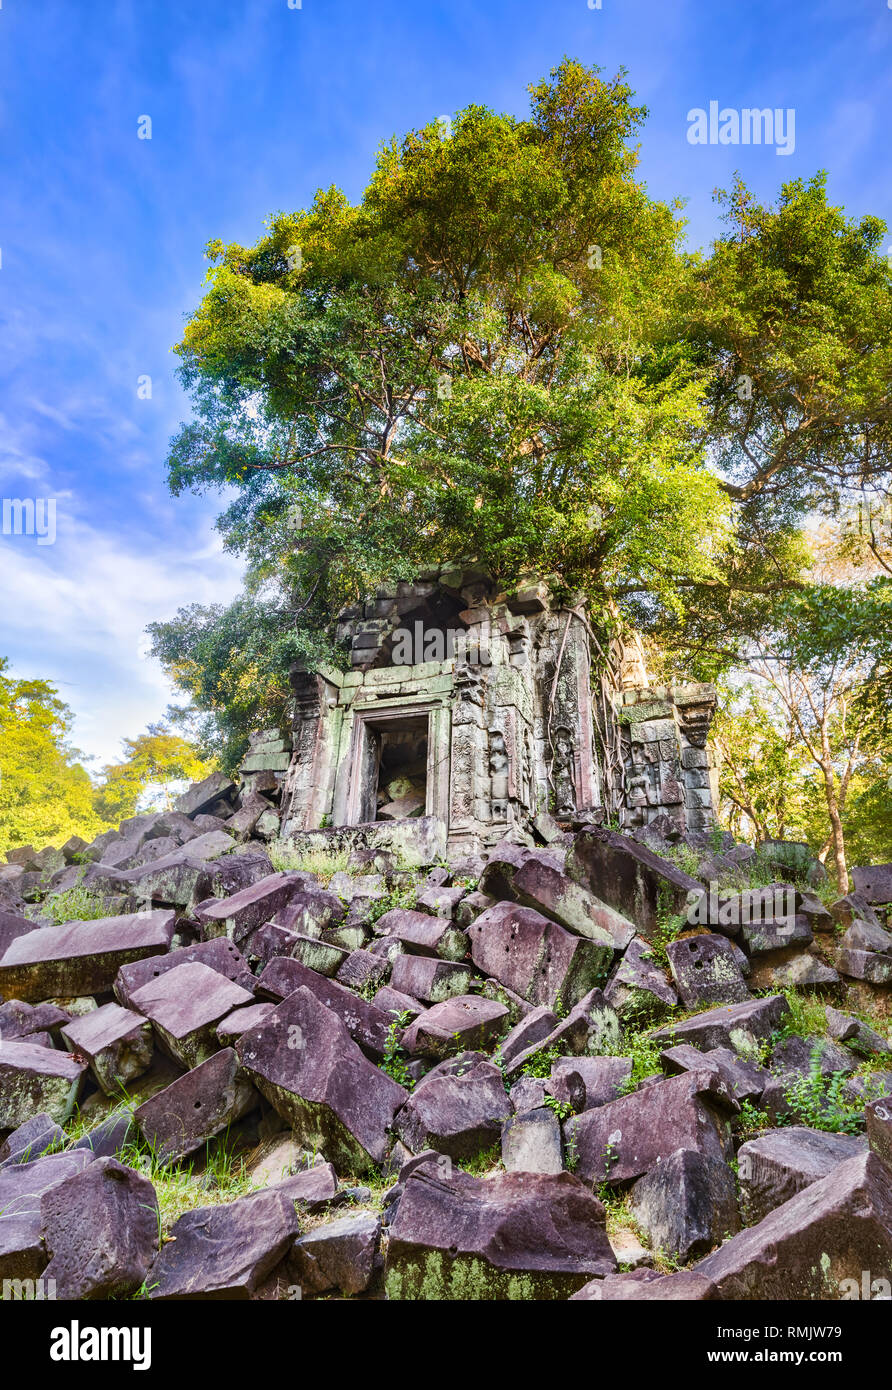 Beng Mealea or Bung Mealea temple at morning time. Siem Reap. Cambodia Stock Photo